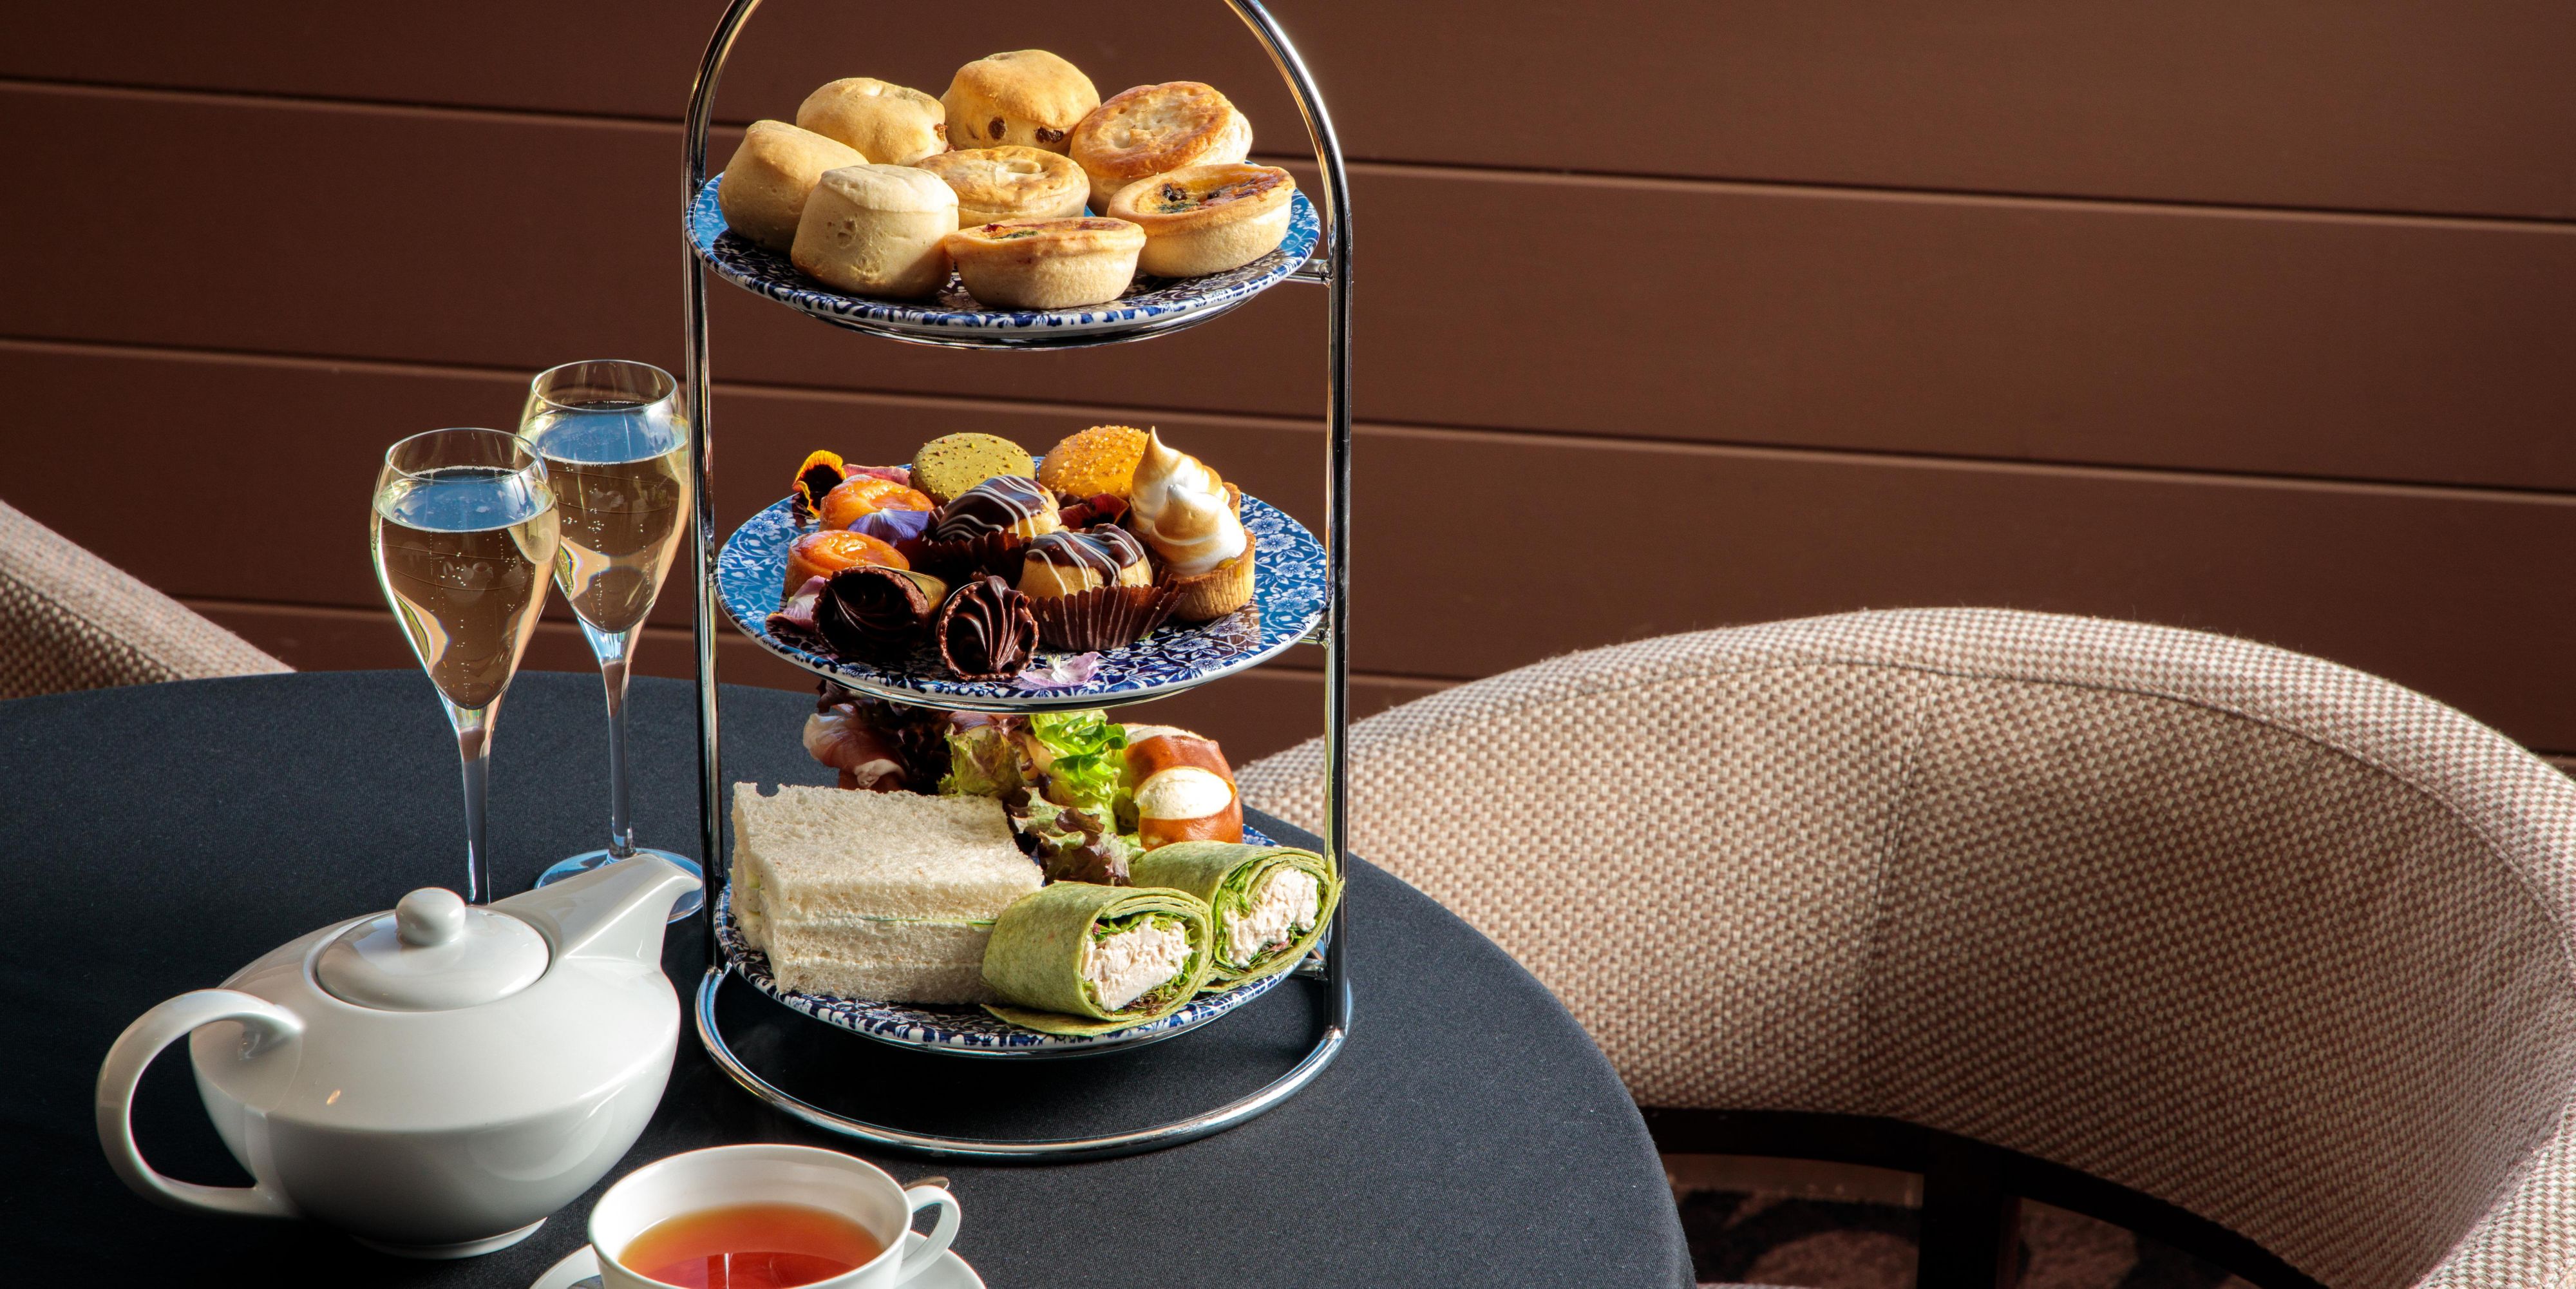 Take an afternoon respite and enjoy our high tea service. InterContinental Adelaide’s high tea offerings are the perfect complement to an afternoon at Adelaide. Delight in a range of gourmet sandwiches and light lunch items, hot pastries, freshly baked scones, and delicious sweets to accompany your afternoon cuppa.